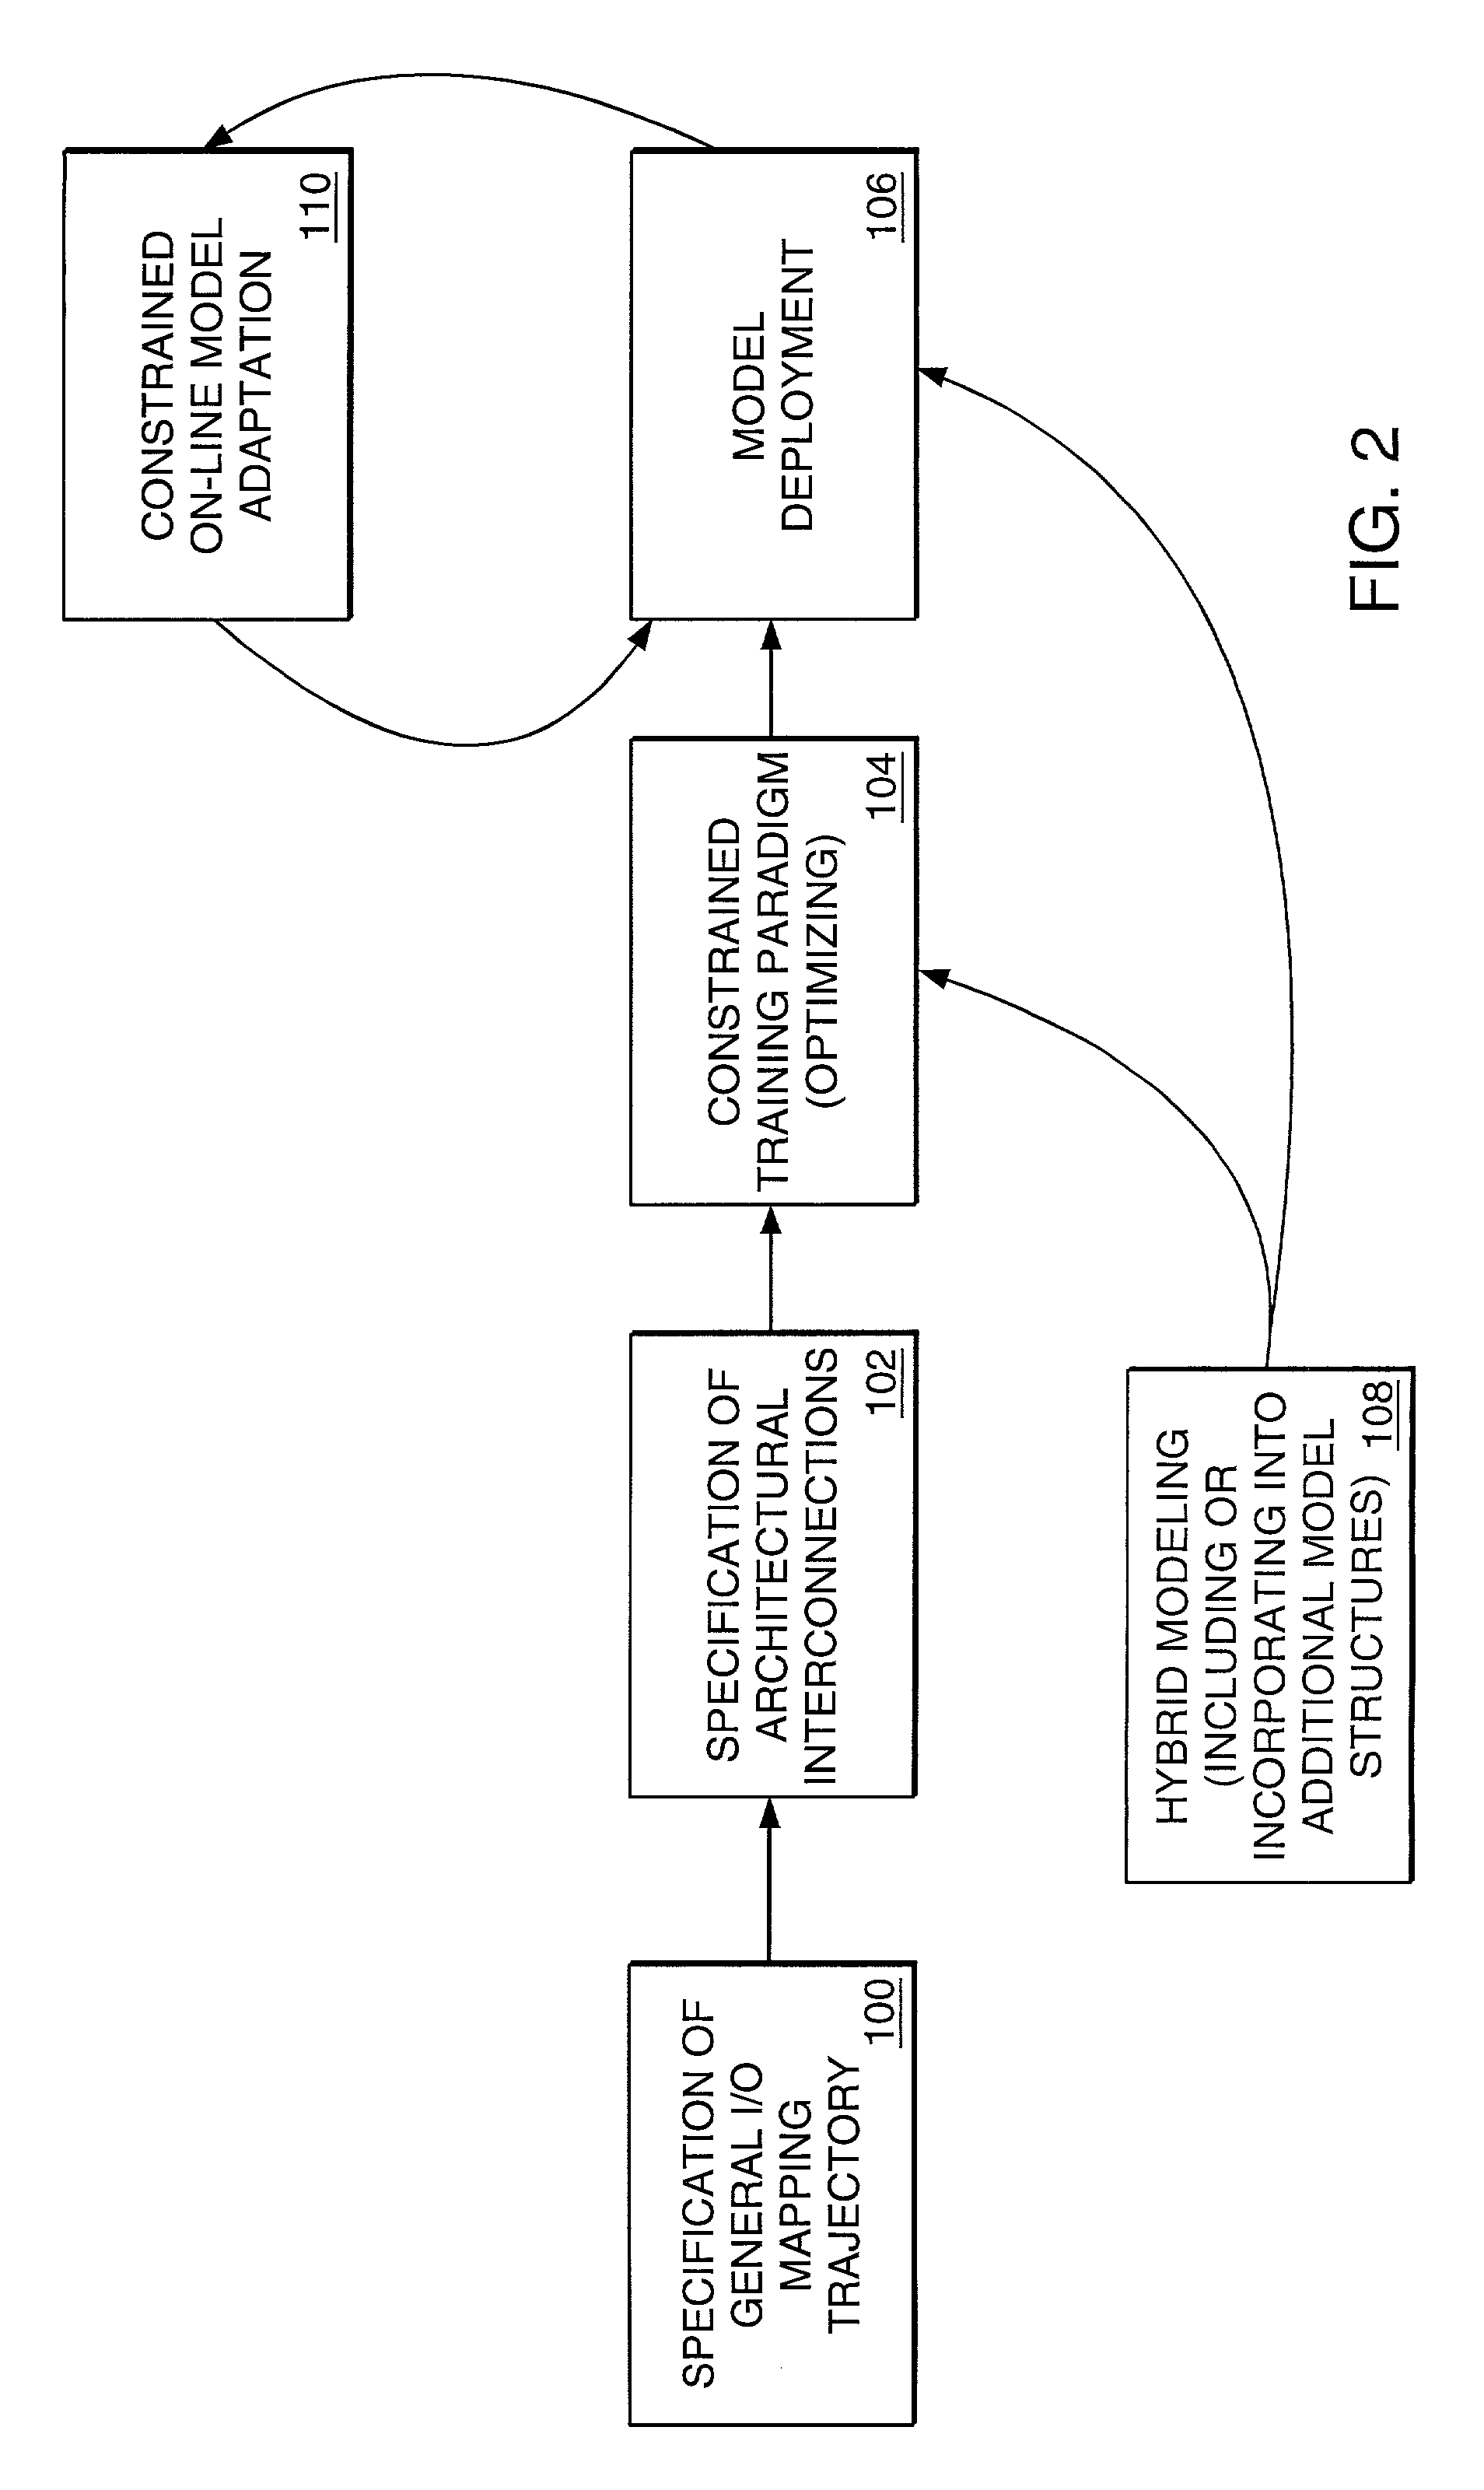 Computer method and apparatus for constraining a non-linear approximator of an empirical process